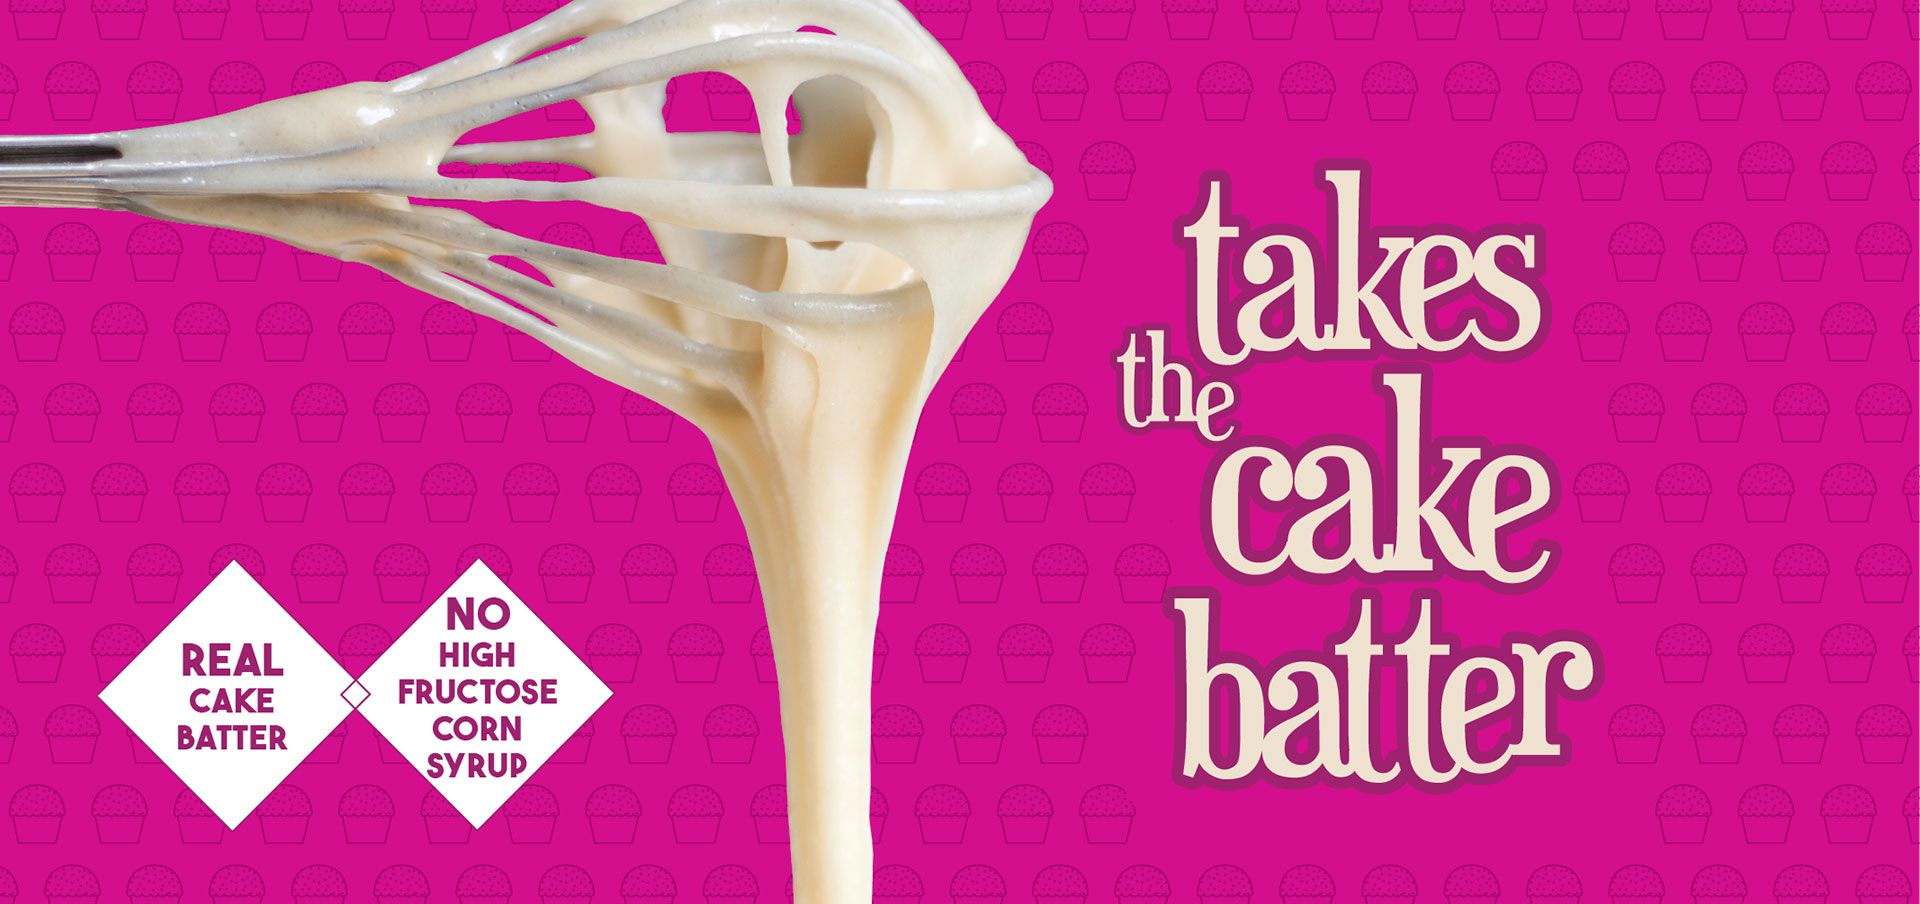 takes the cake batter label image